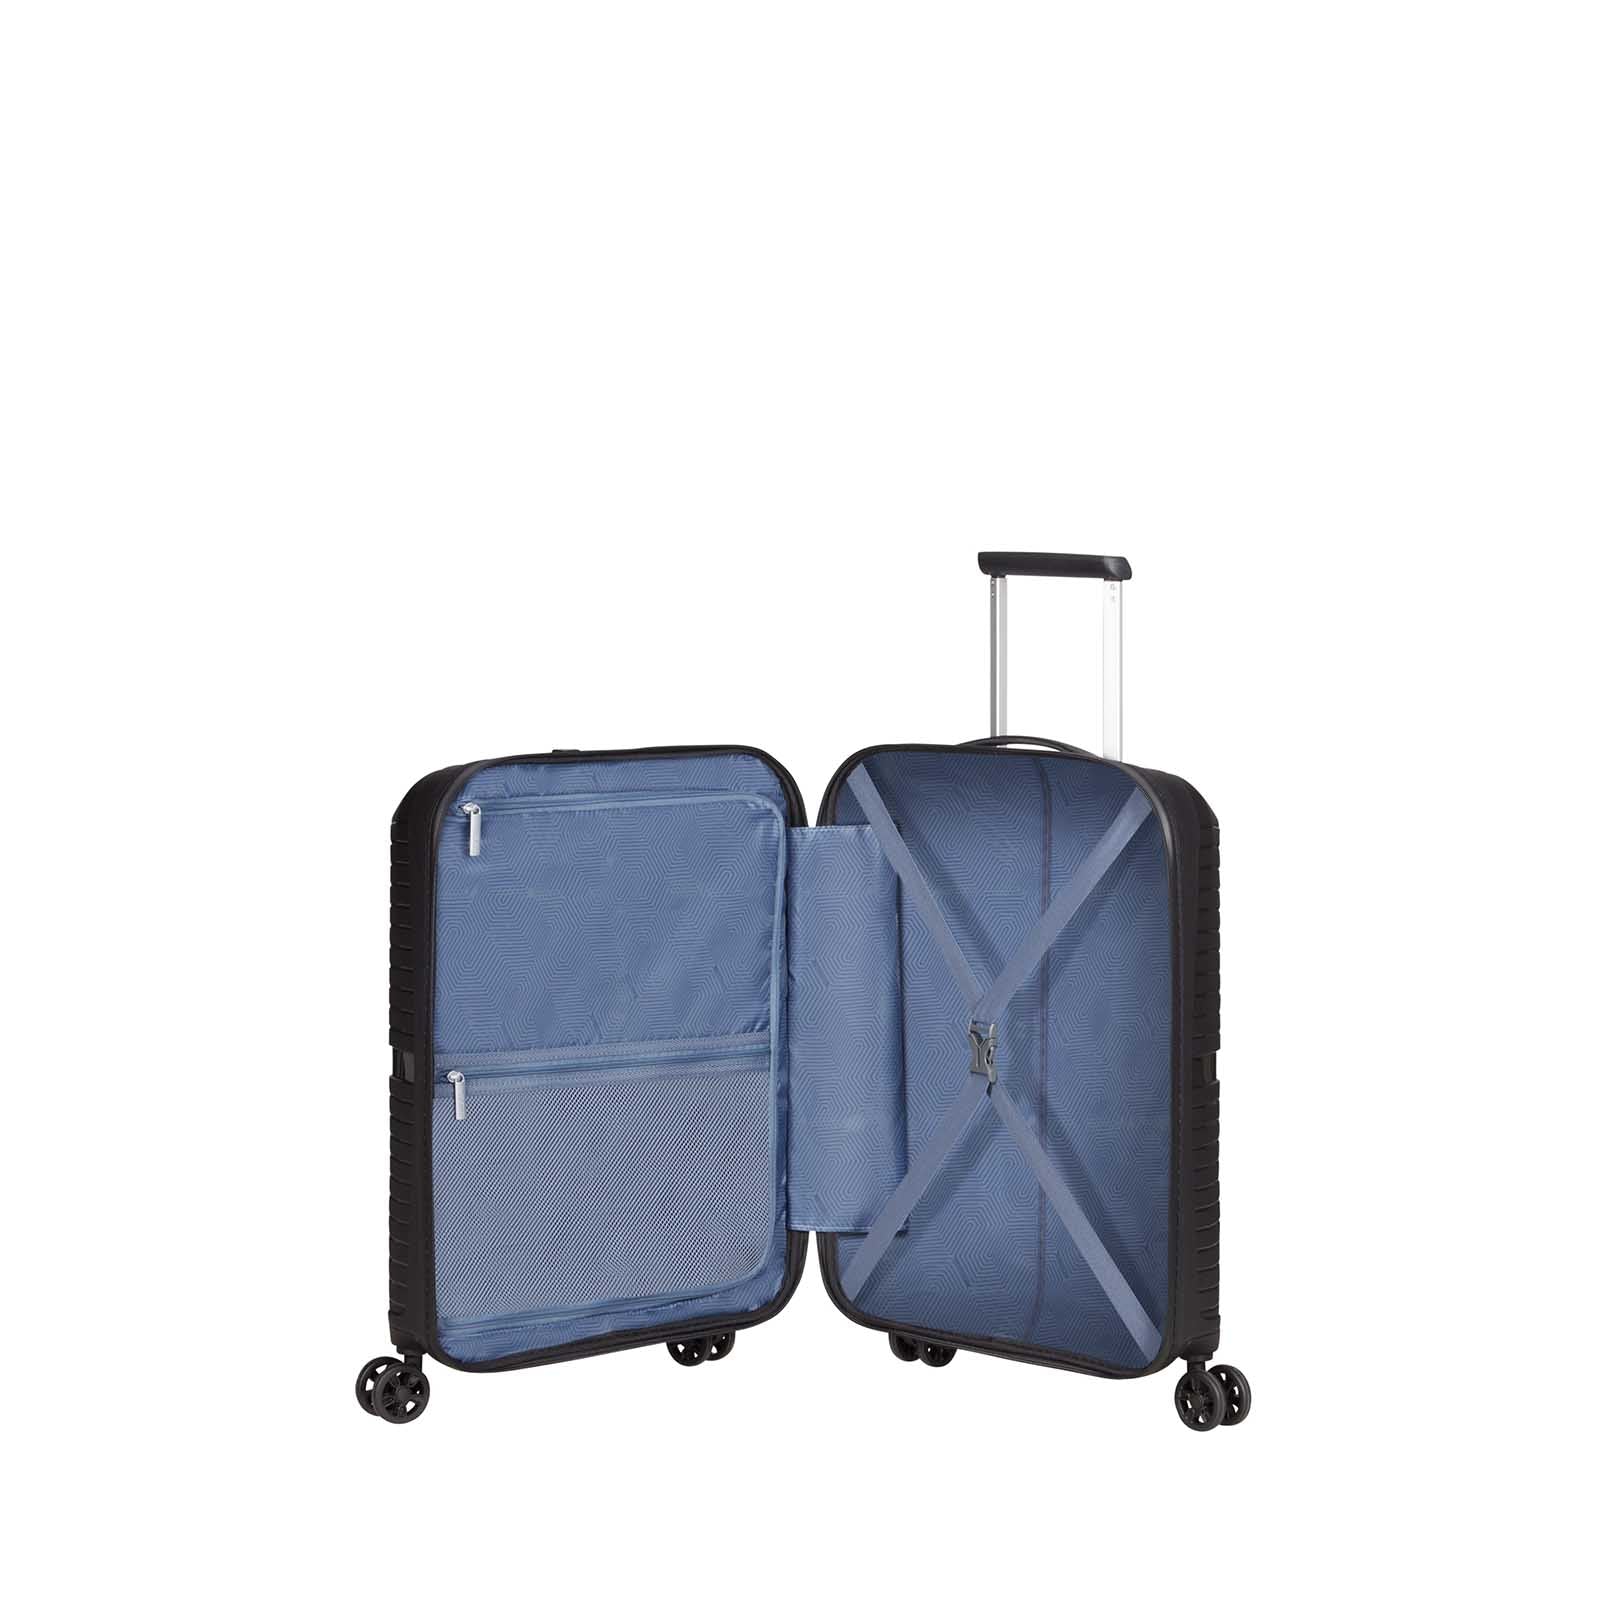 American-Tourister-Airconic-55cm-Carry-On-Suitcase-Onyx-Black-Open